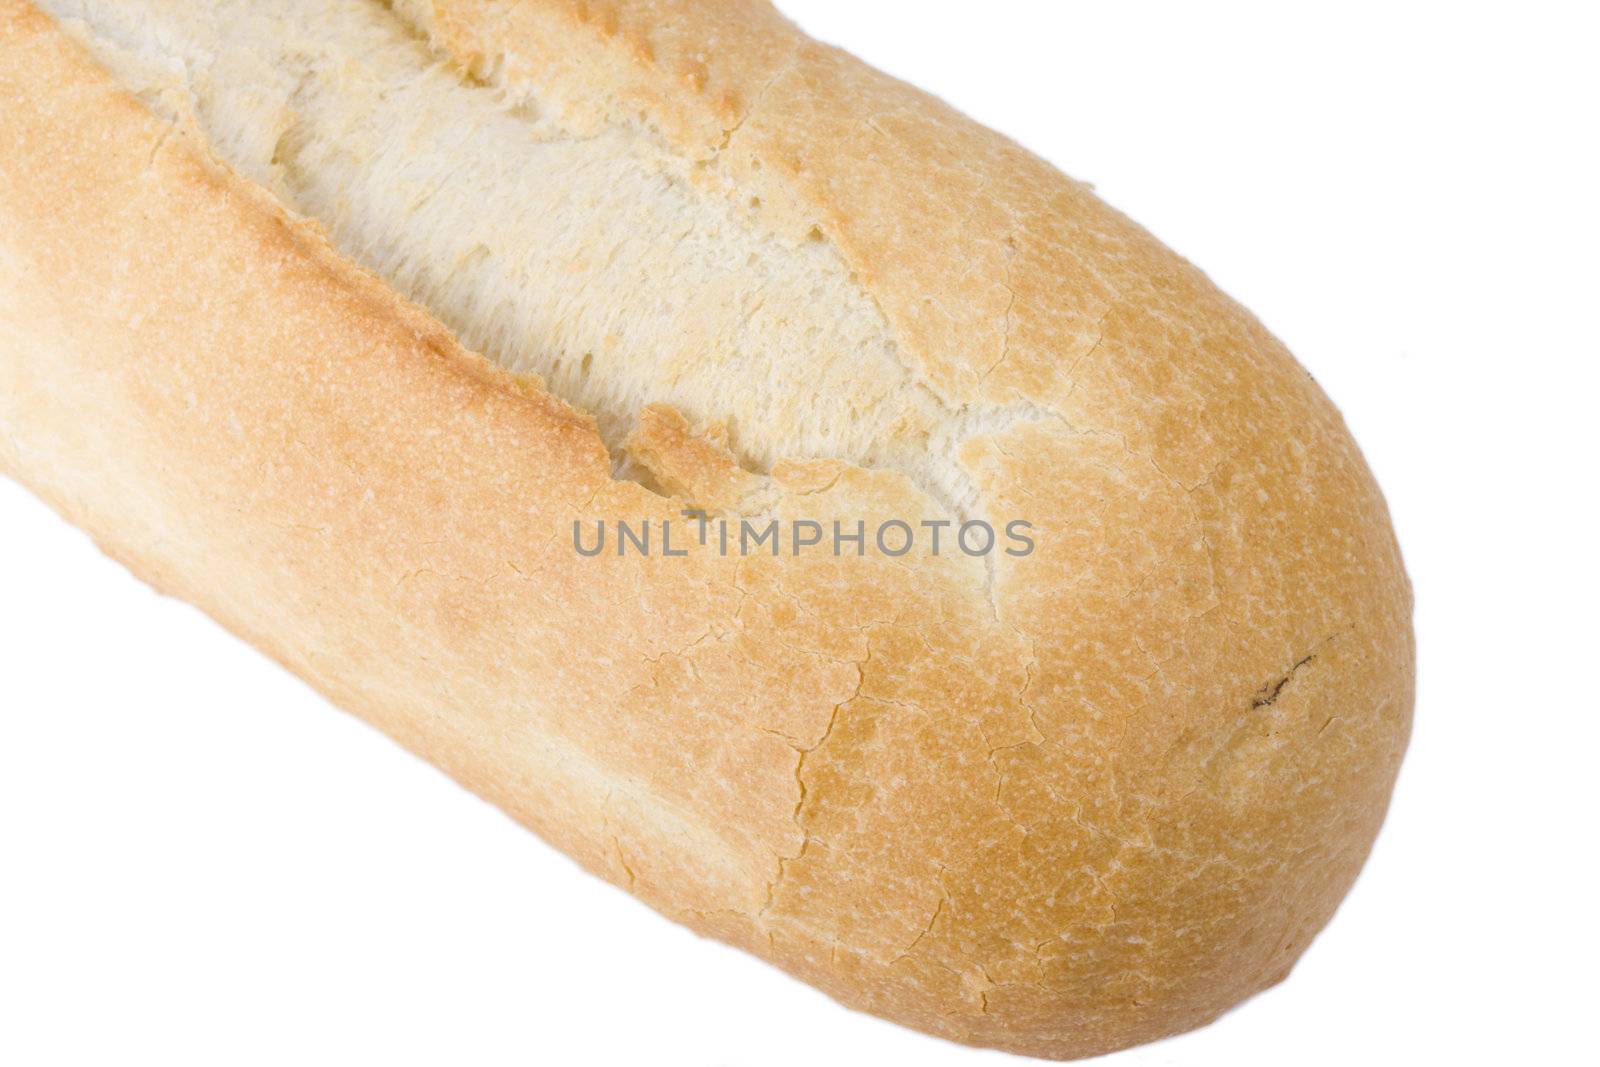 baguette bread isolated on white background